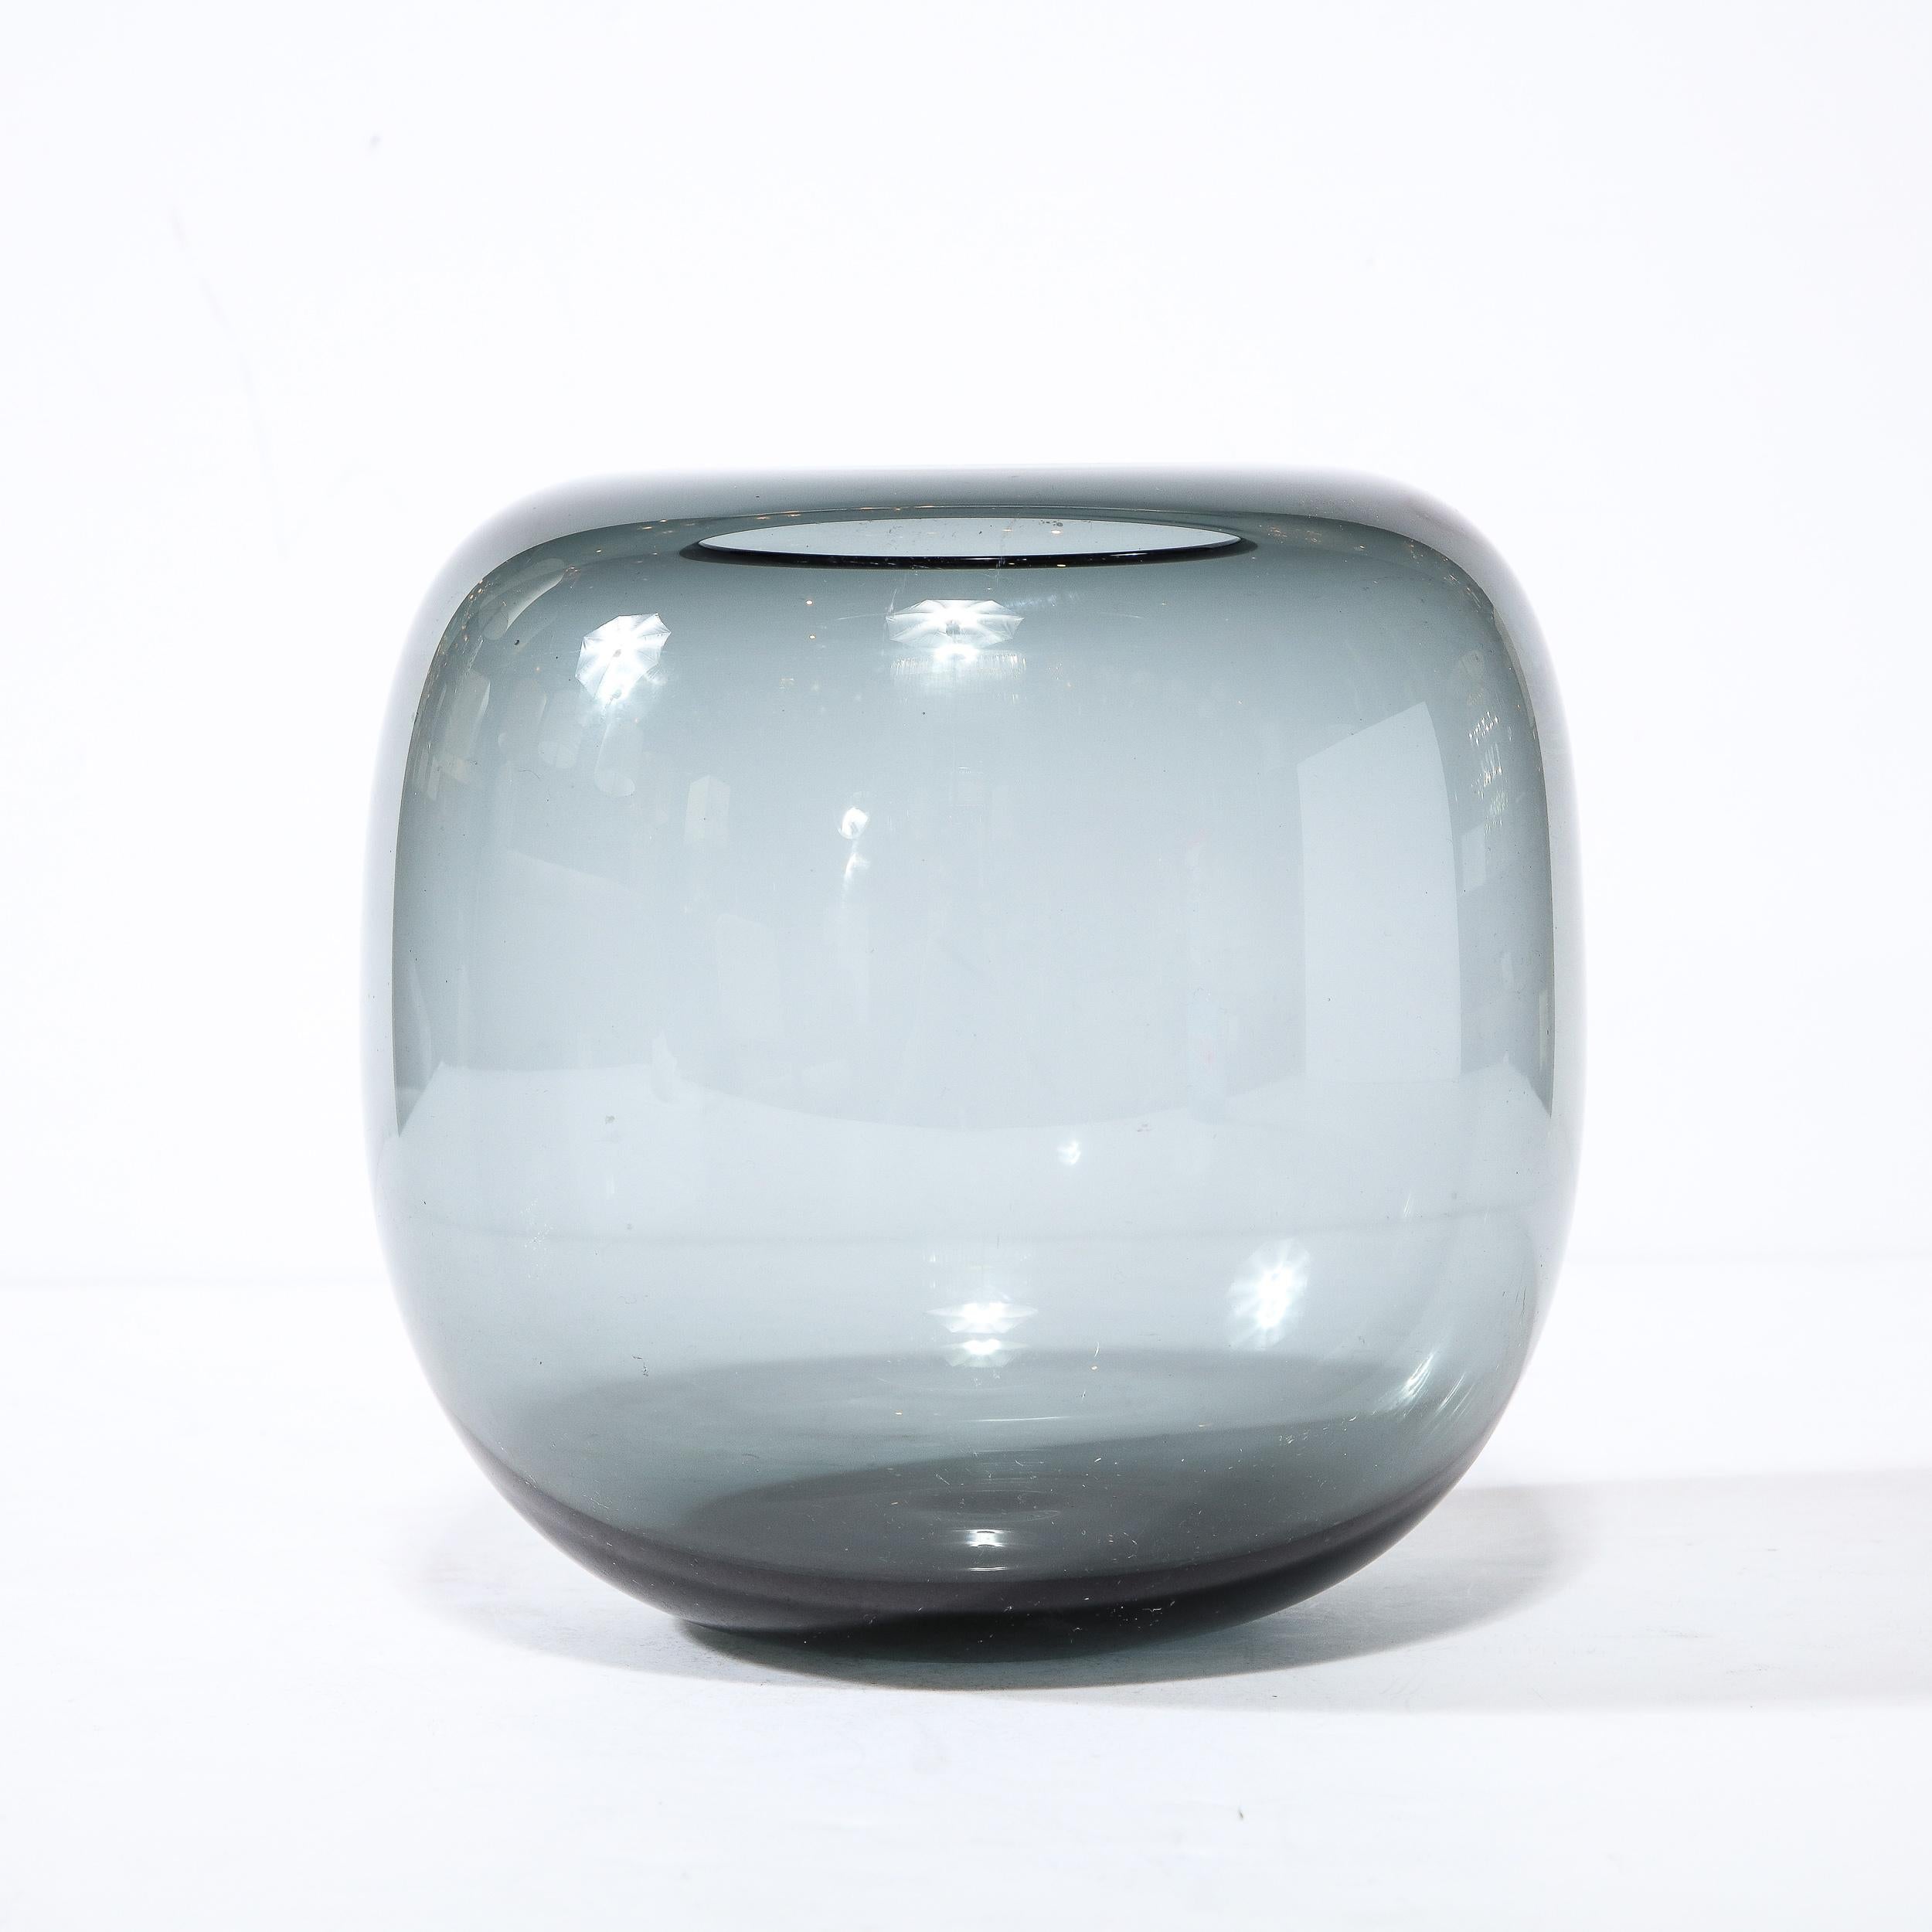 This elegant Mid Century Modern vase was realized by the esteemed maker Holmegaard in Denmark circa 1960. It offers an elongated spherical form with a rounded shoulders and a circular mouth- all in a subtle smoked translucent glass. This piece is a